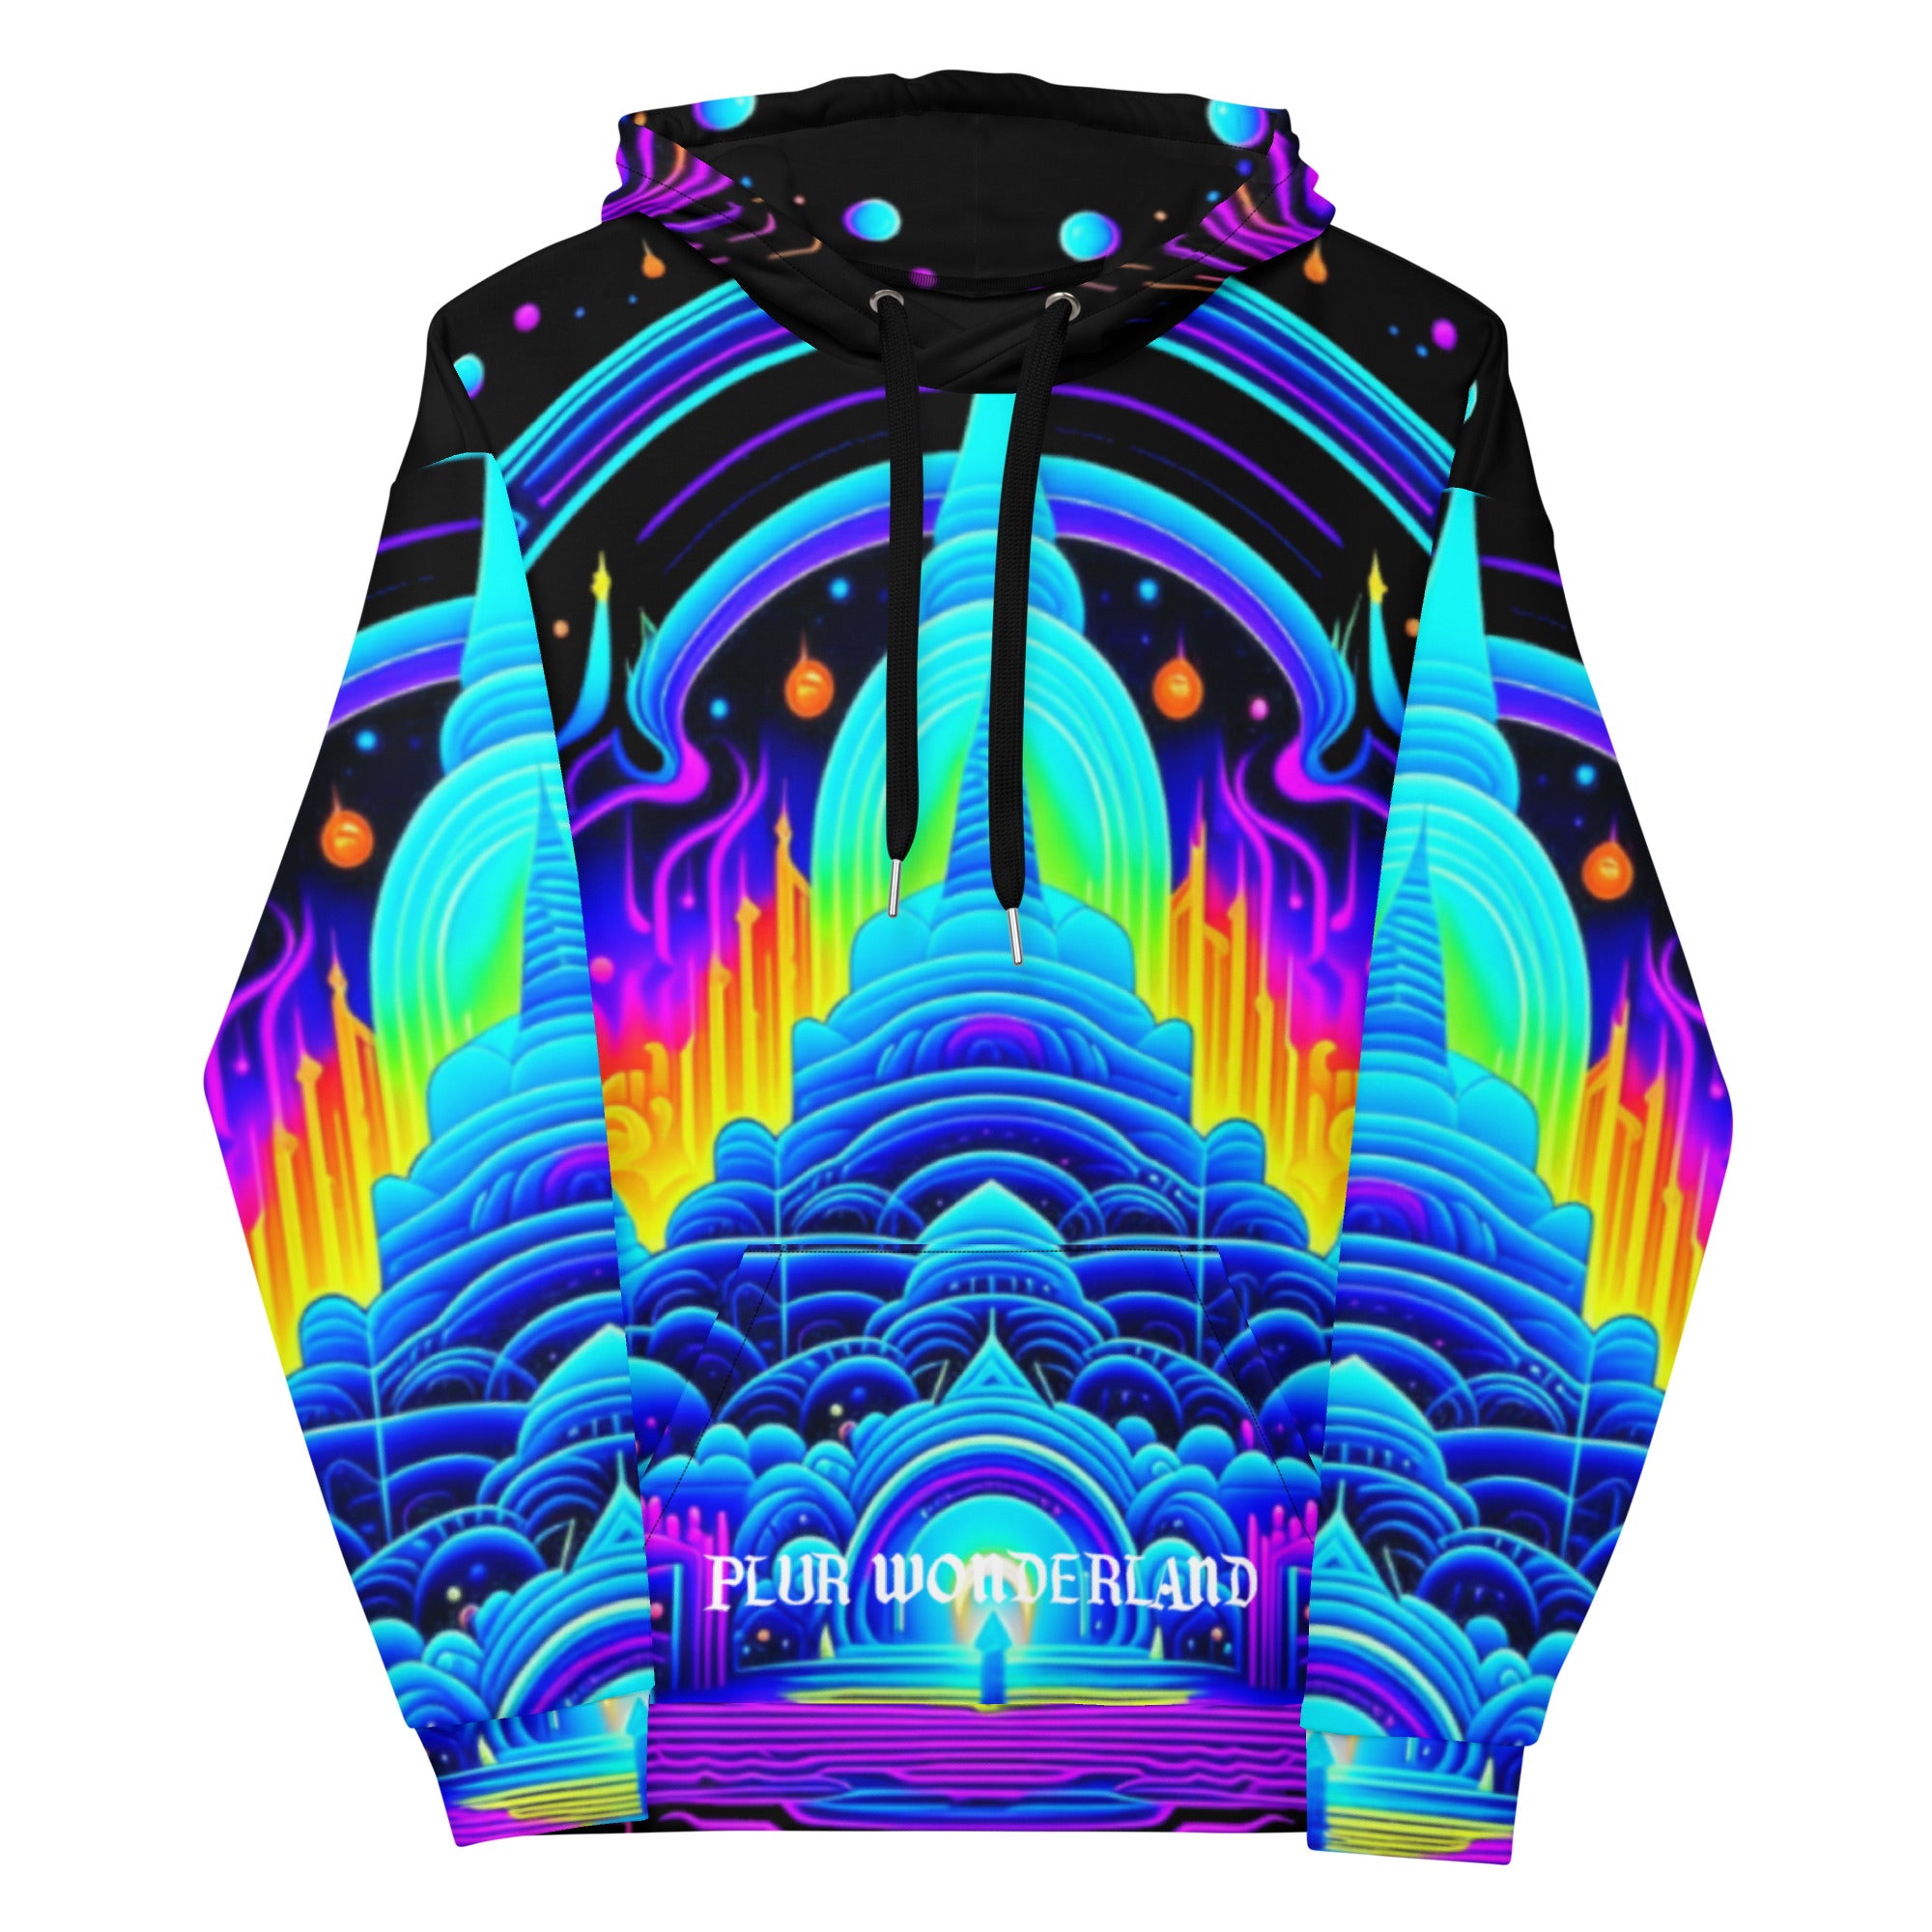 Experience a trippy journey with the PLUR WONDERLAND HOODIE. Designed for both men and women, this vibrant and colorful hoodie will add a touch of psychedelic energy to your wardrobe. Made with quality materials, this hoodie offers both style and comfort. Unleash your inner adventurer with this unique and eye-catching hoodie.